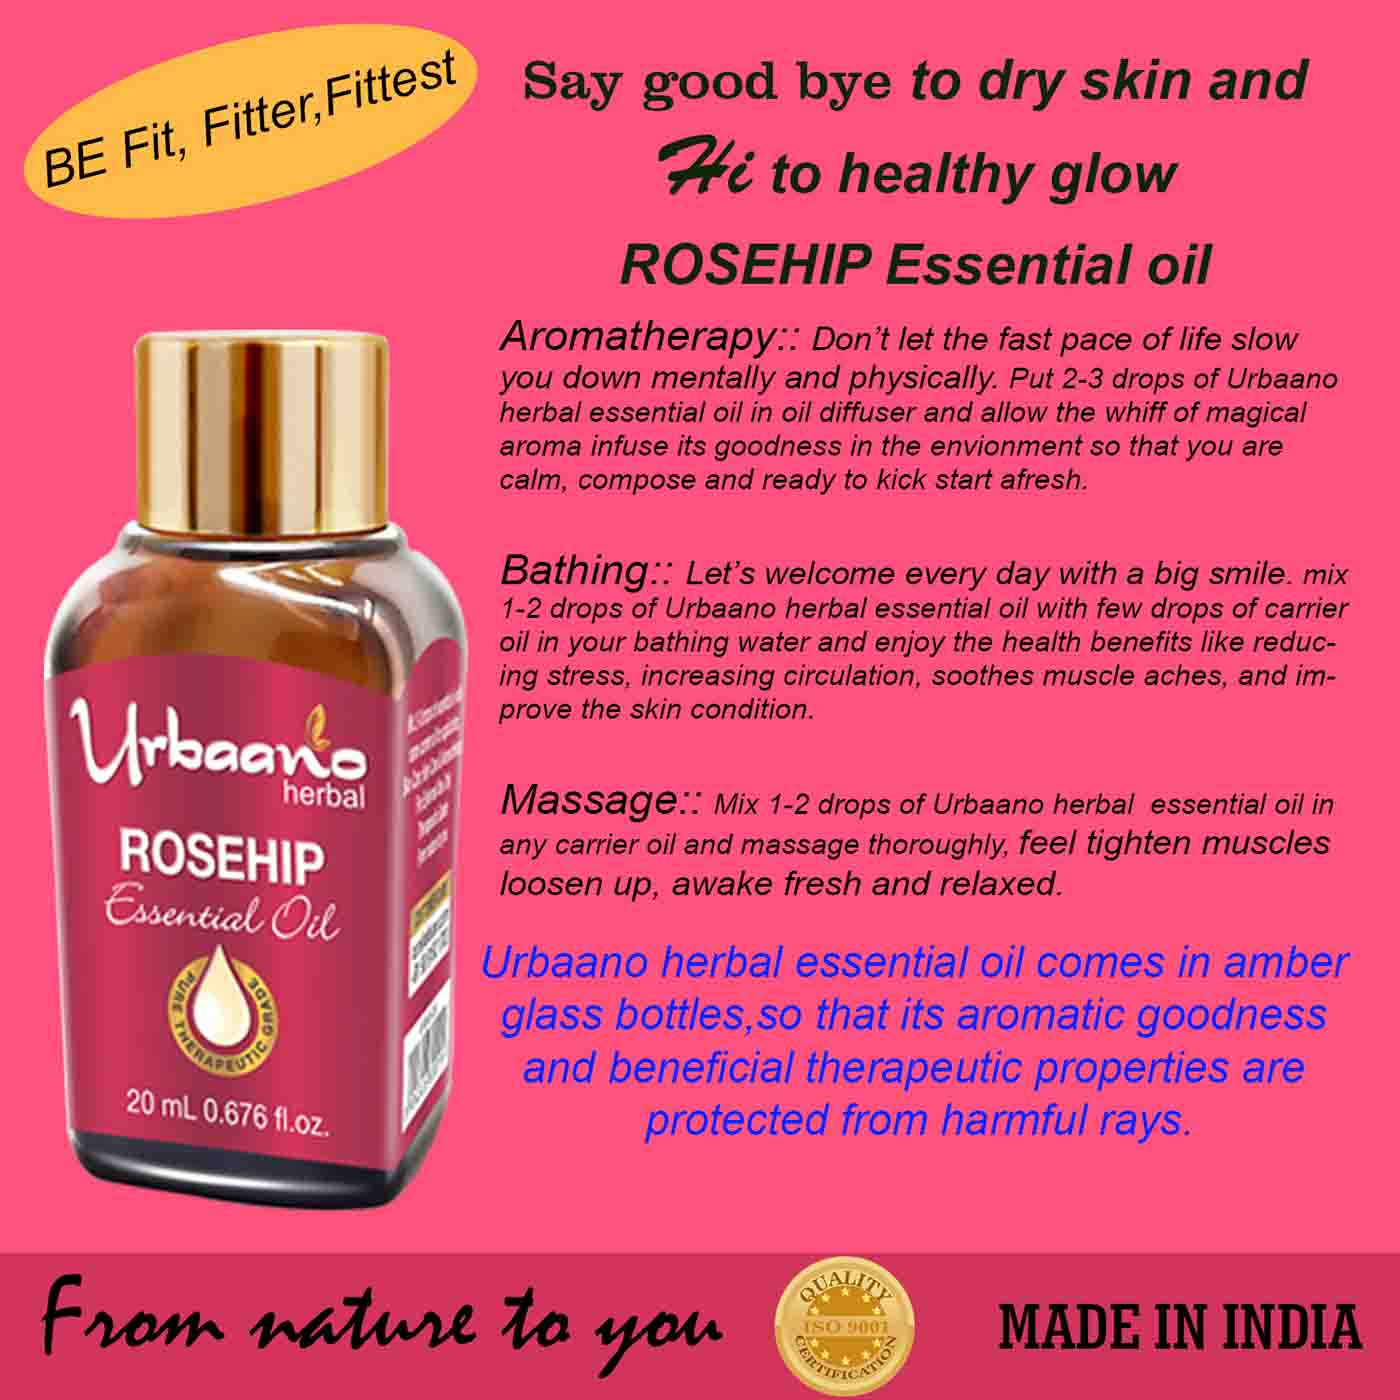 urbaano herbal rosehip essential oil, carrier oil, for skincare, aromatherapy